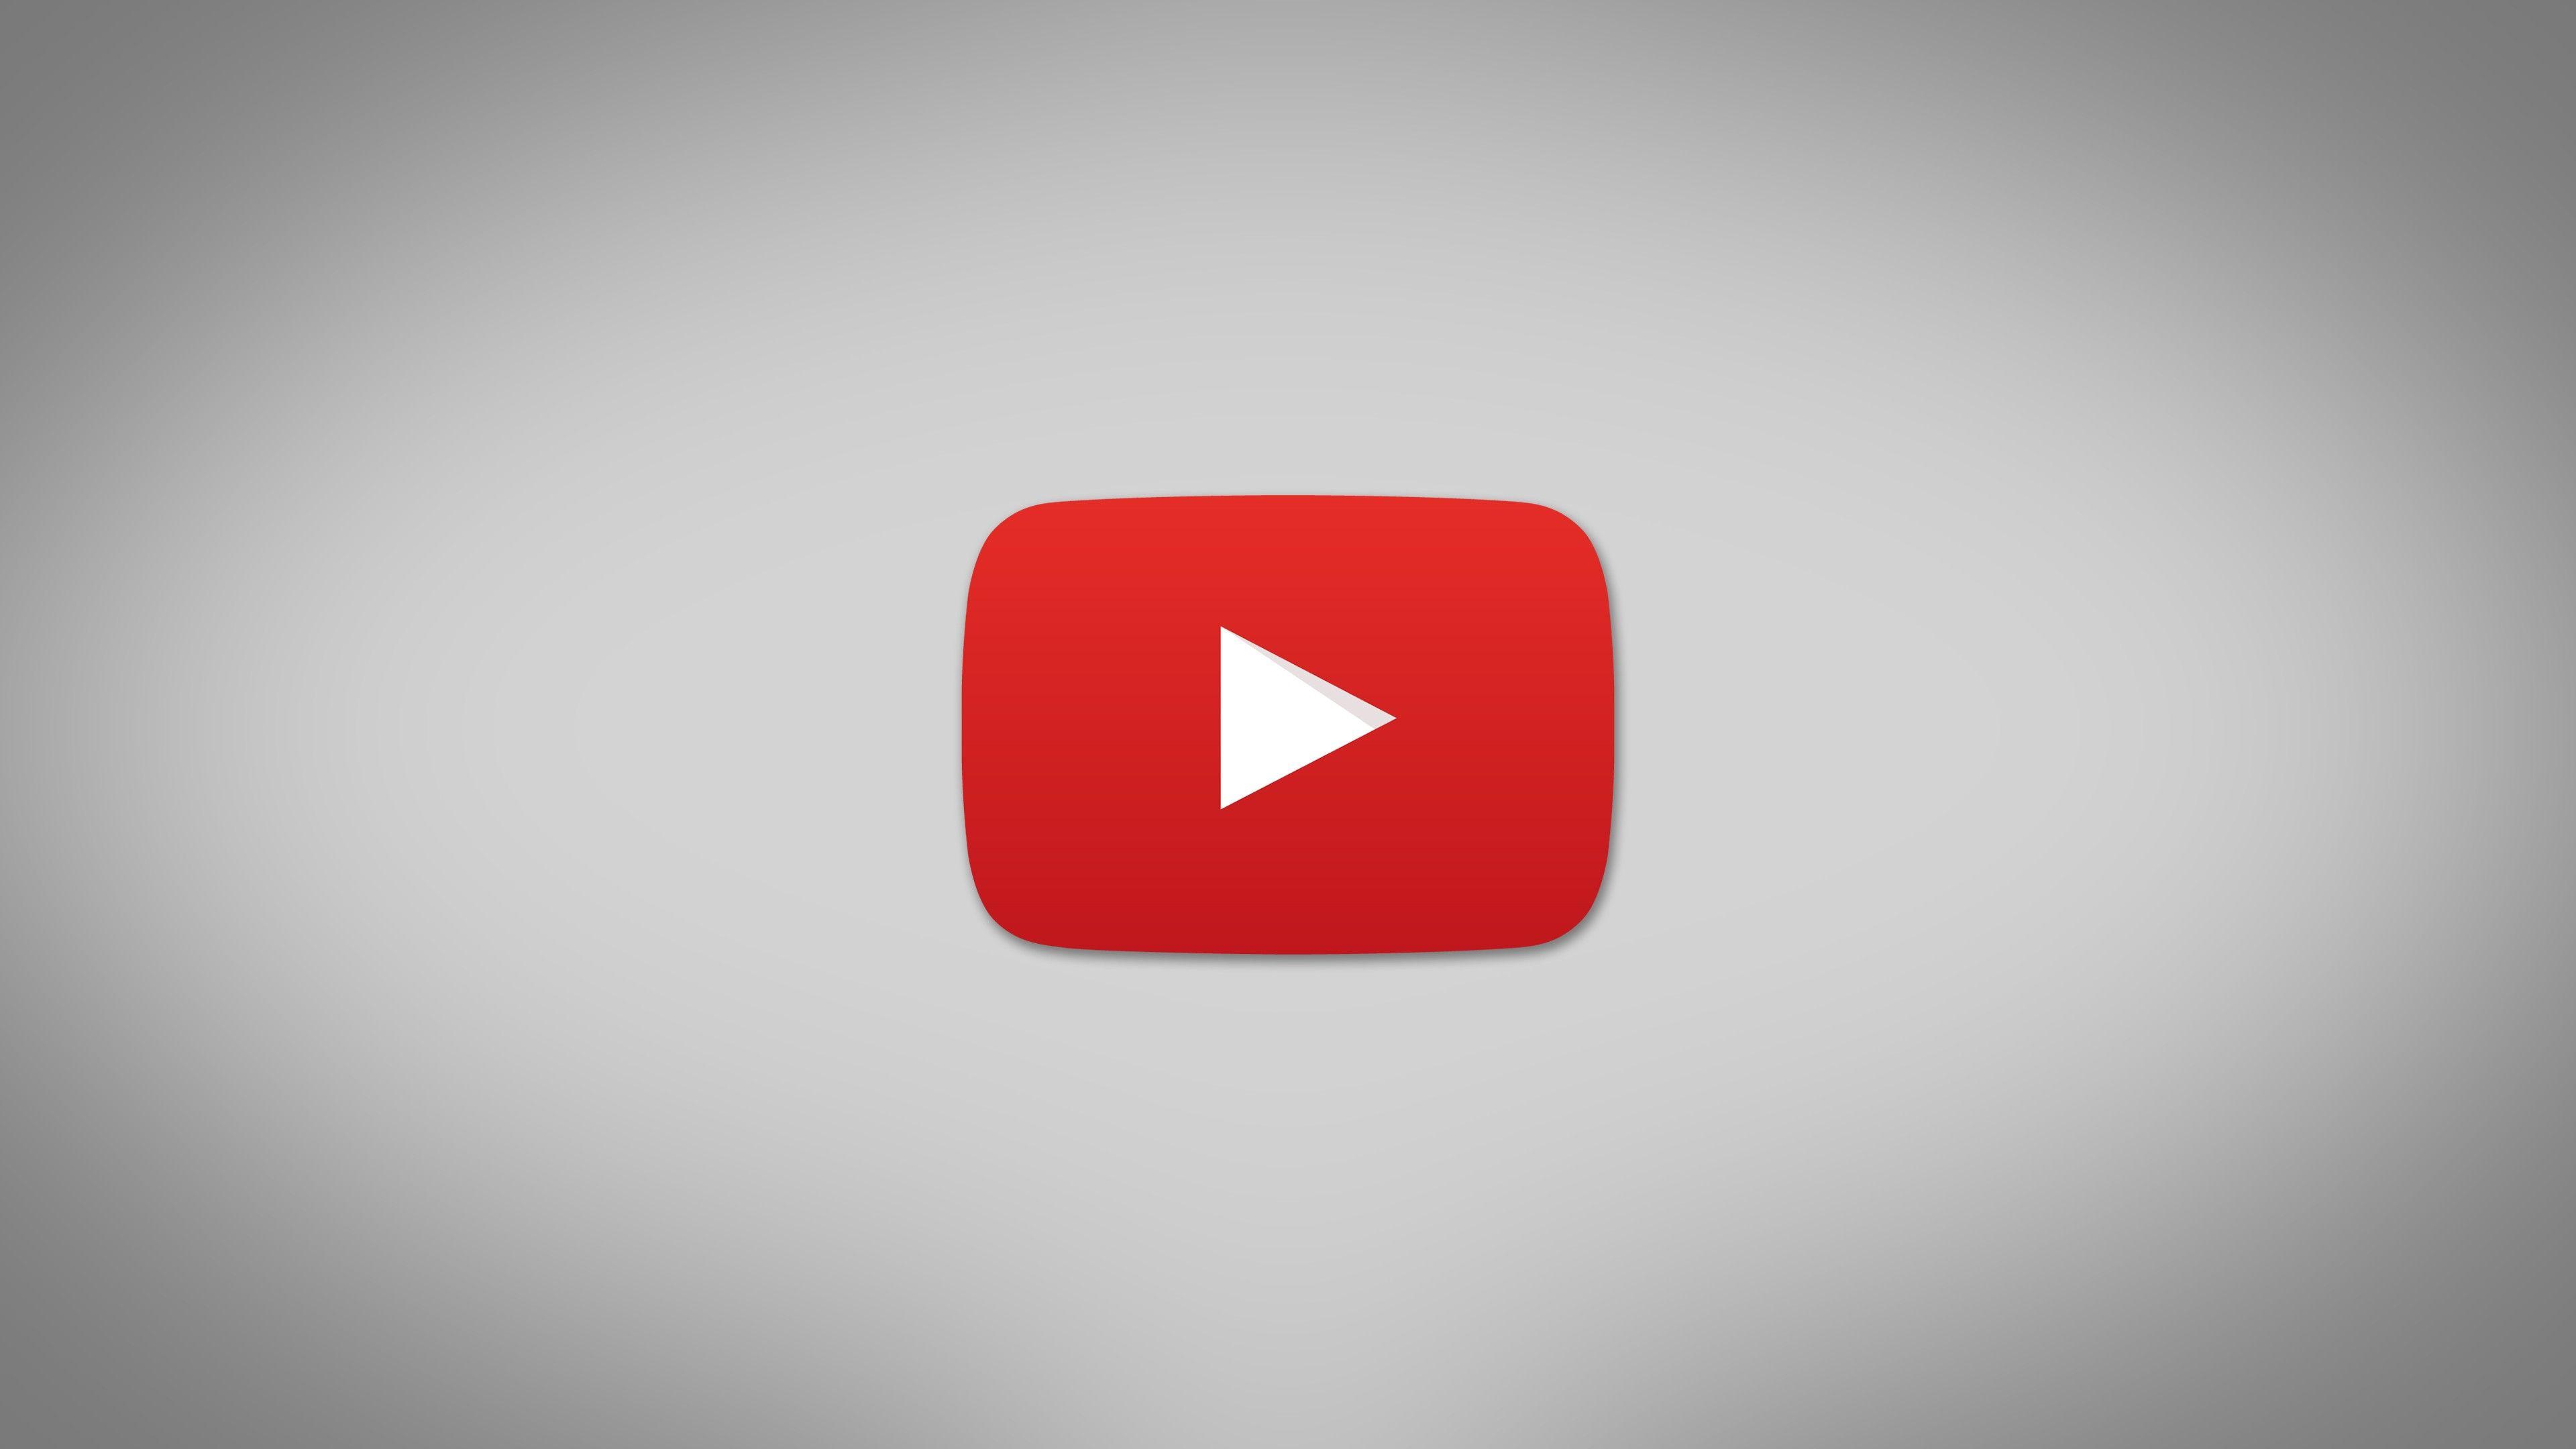 Youtube Logo Wallpapers Wallpaper Cave